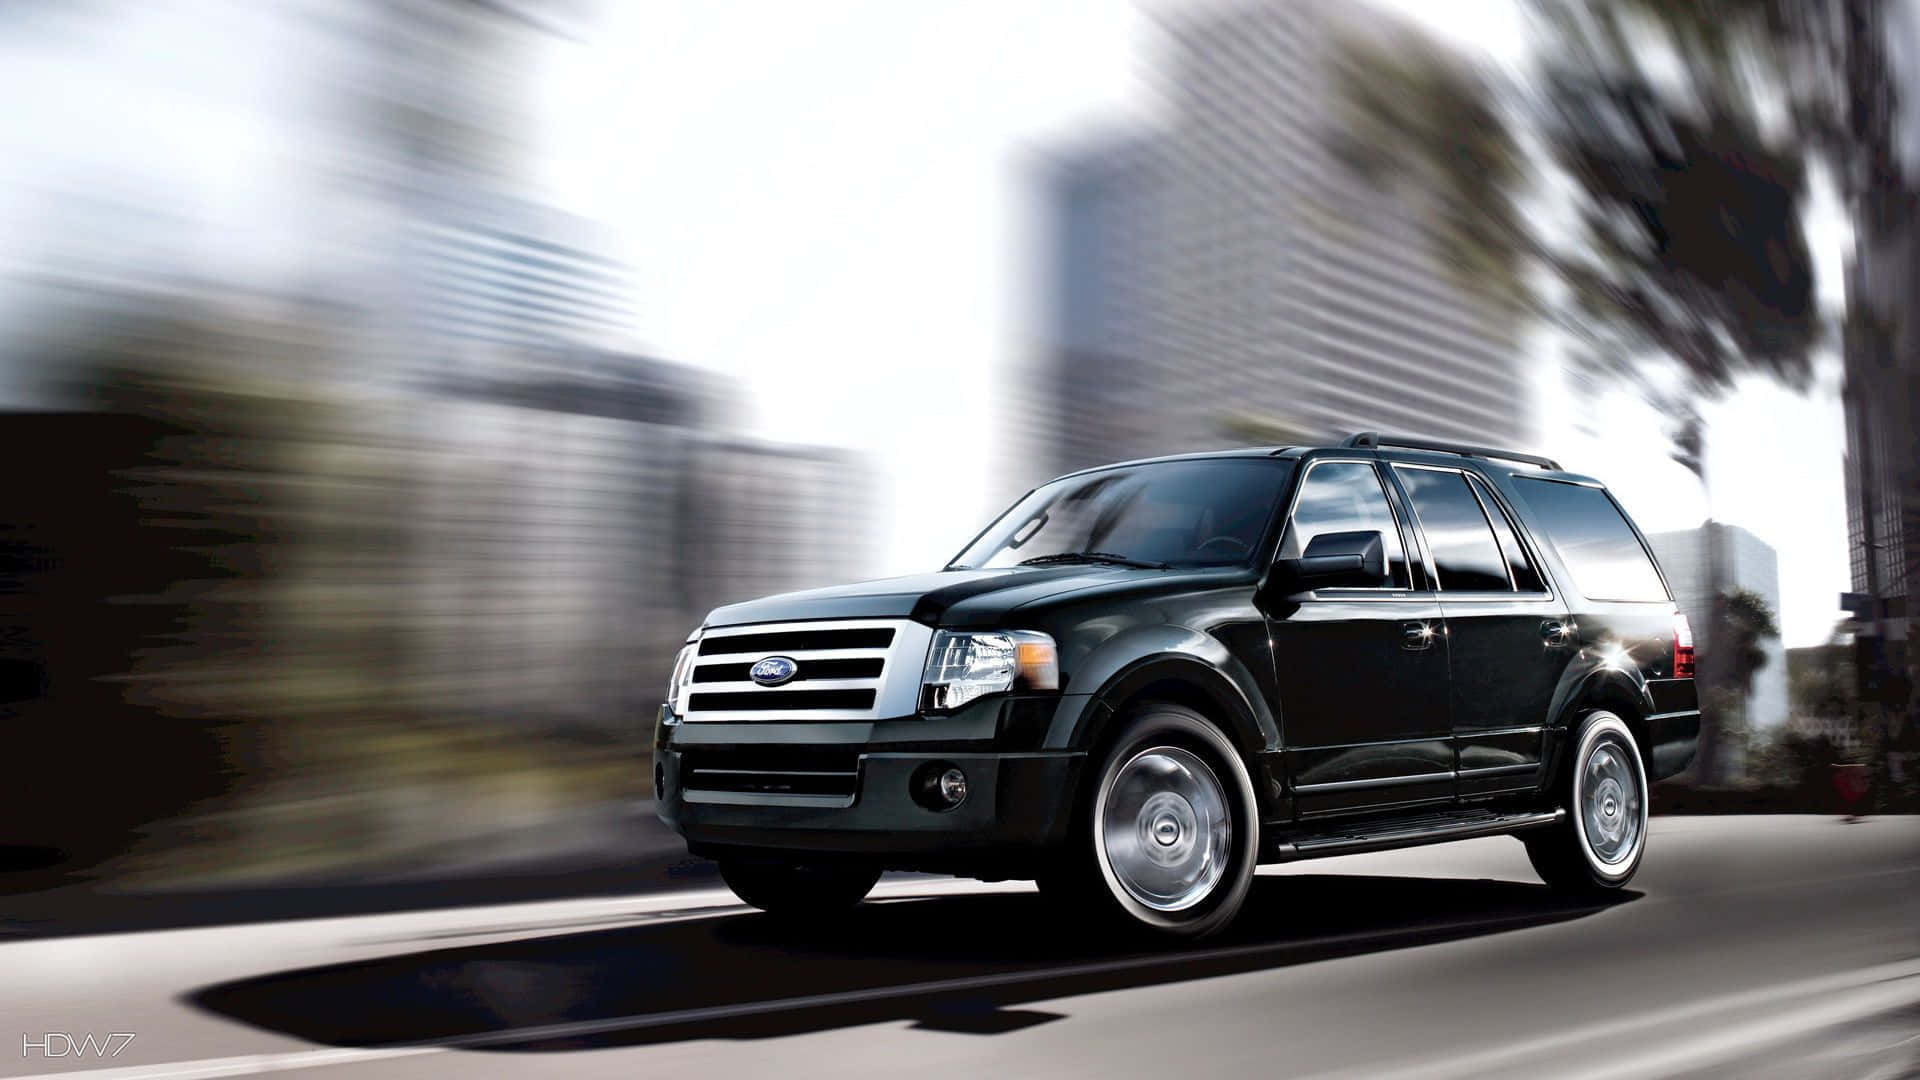 Ford Expedition - The Ultimate American SUV Wallpaper